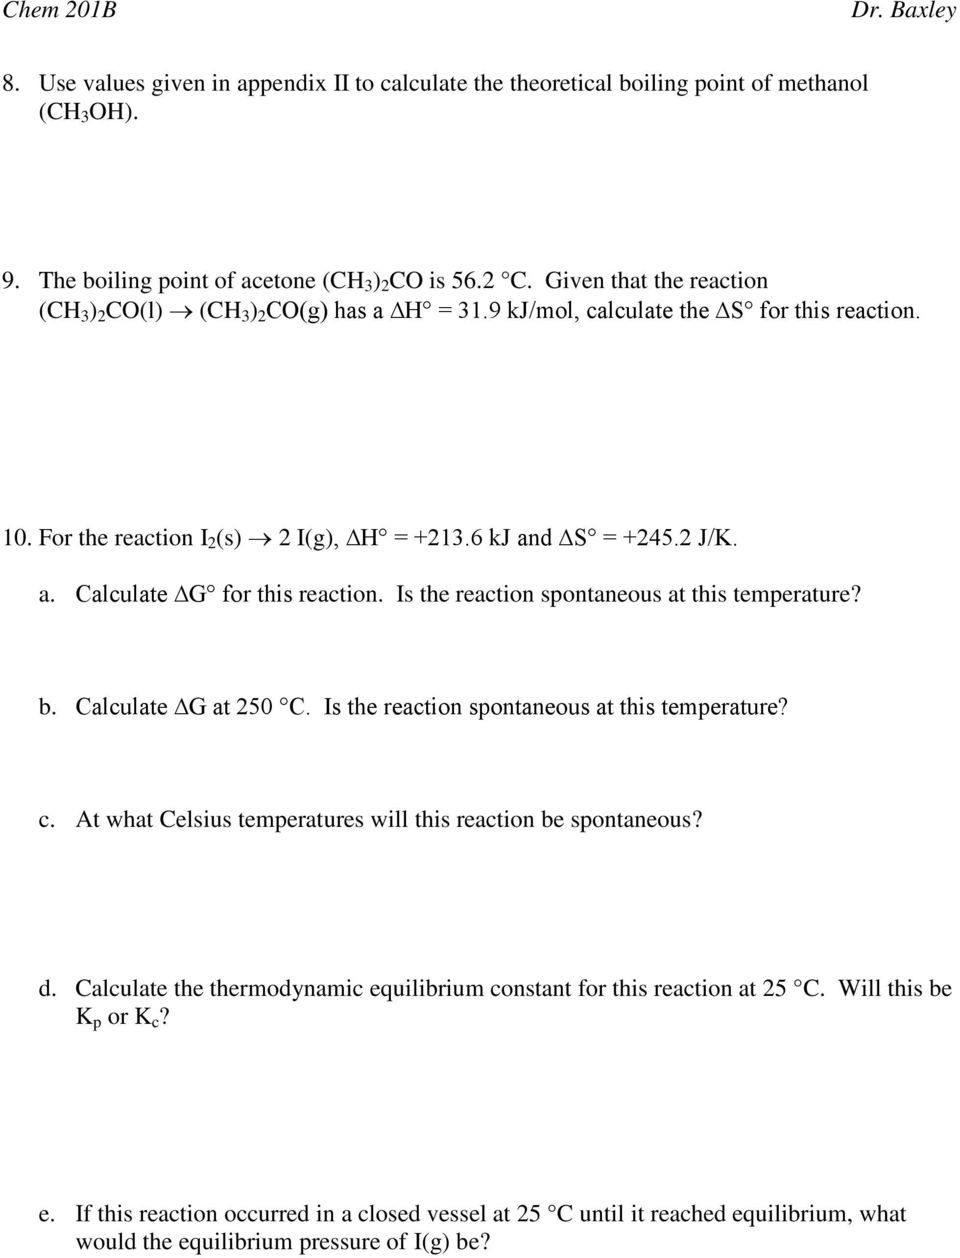 Is the reaction spontaneous at this temperature? b. Calculate G at 250 C. Is the reaction spontaneous at this temperature? c. At what Celsius temperatures will this reaction be spontaneous? d.